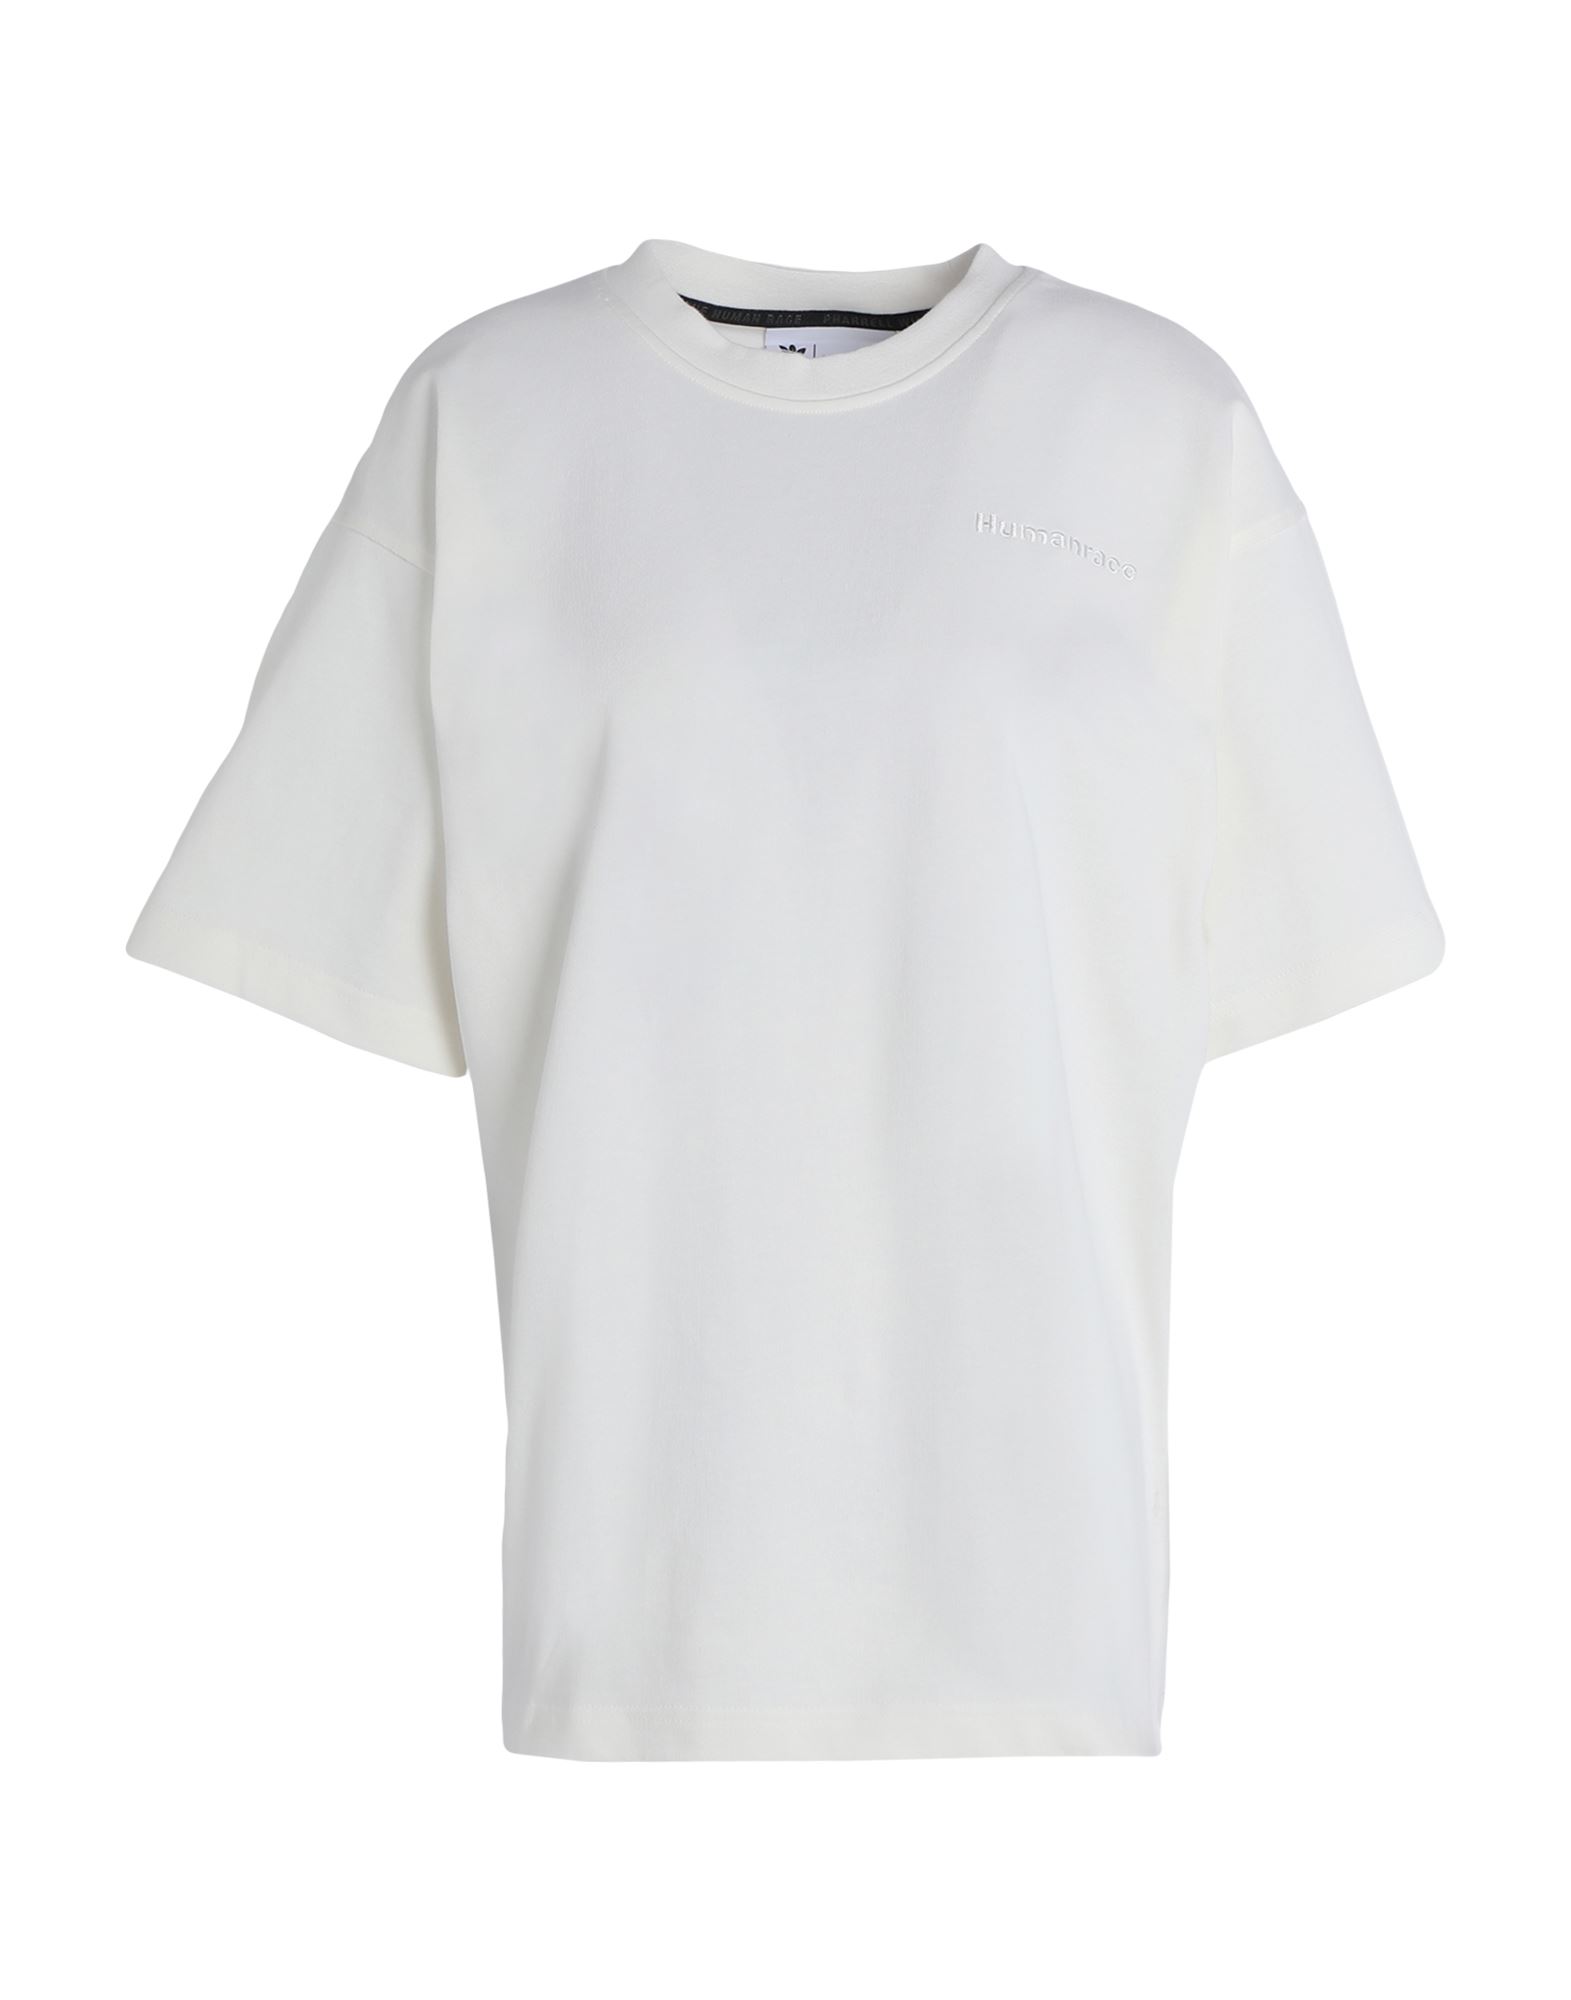 Adidas Originals By Pharrell Williams T-shirts In White